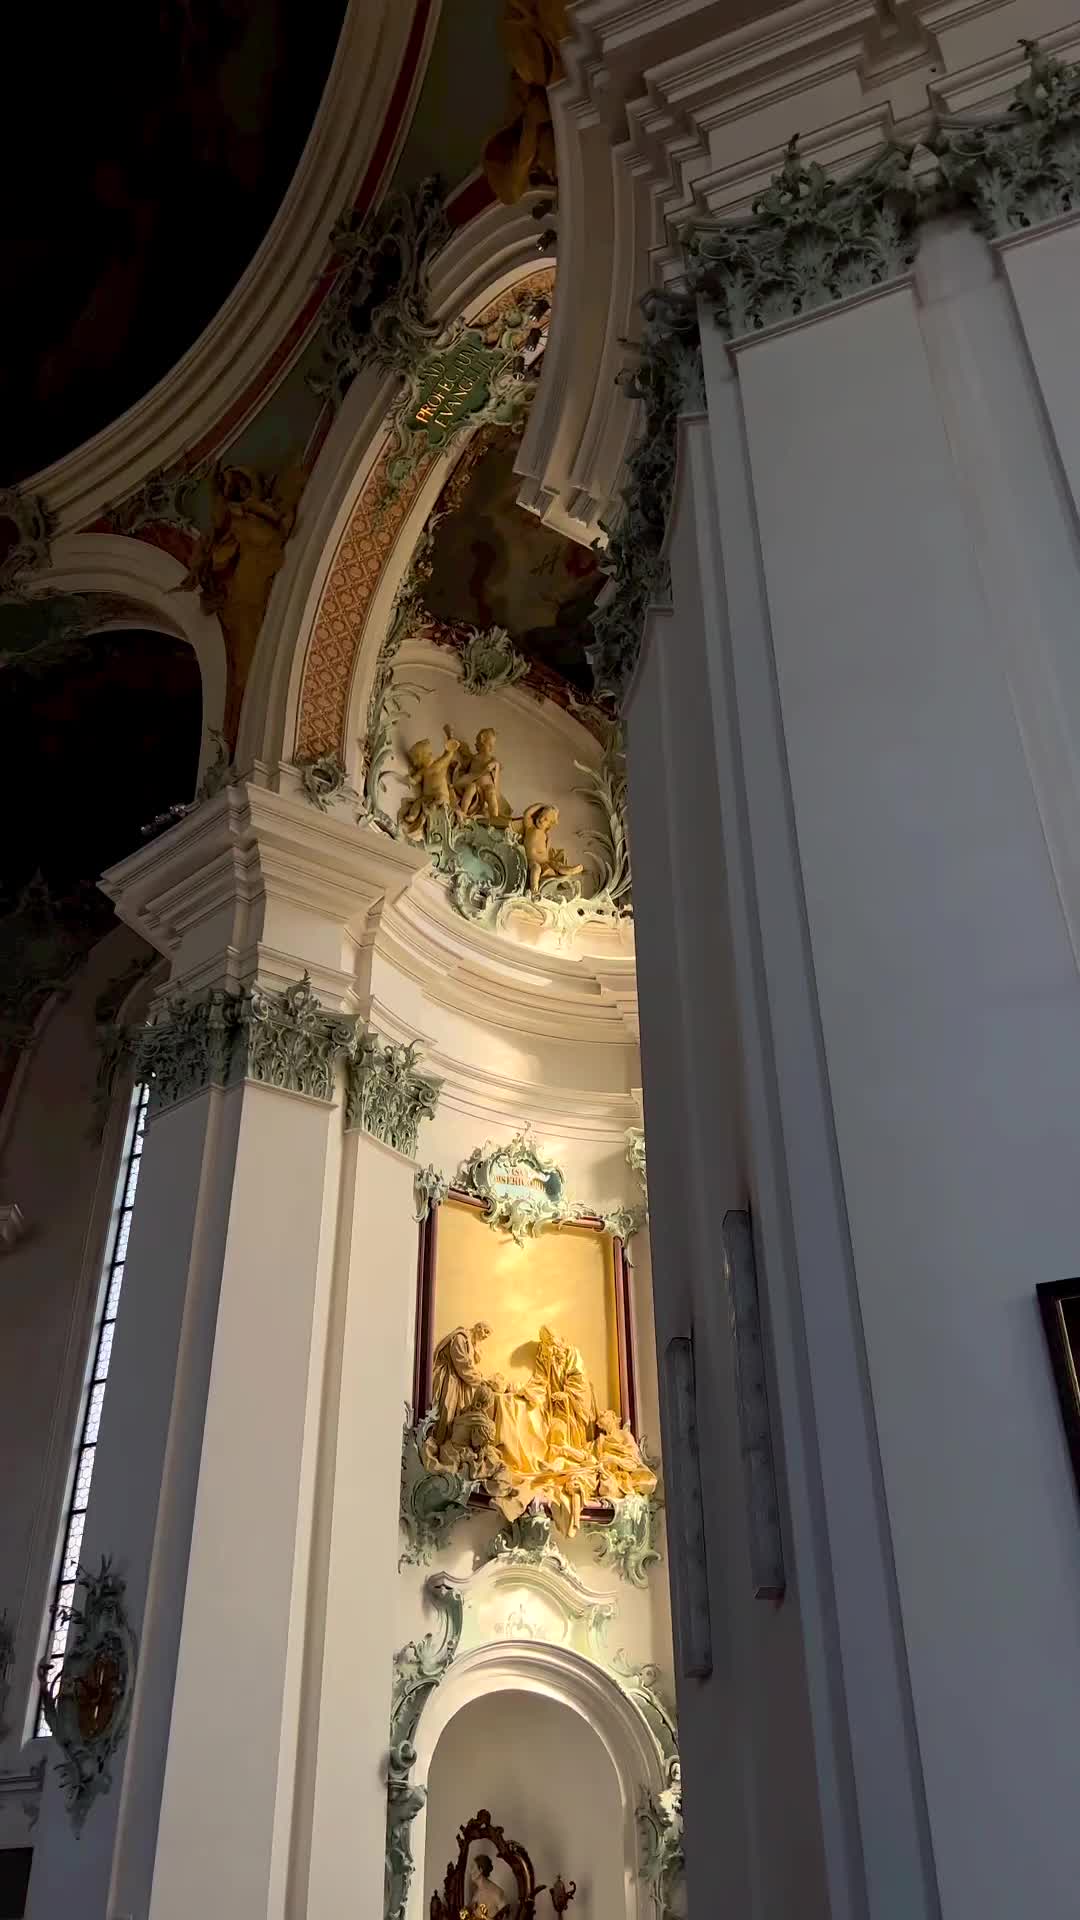 The Majesty of Baroque at St. Gallen UNESCO Site